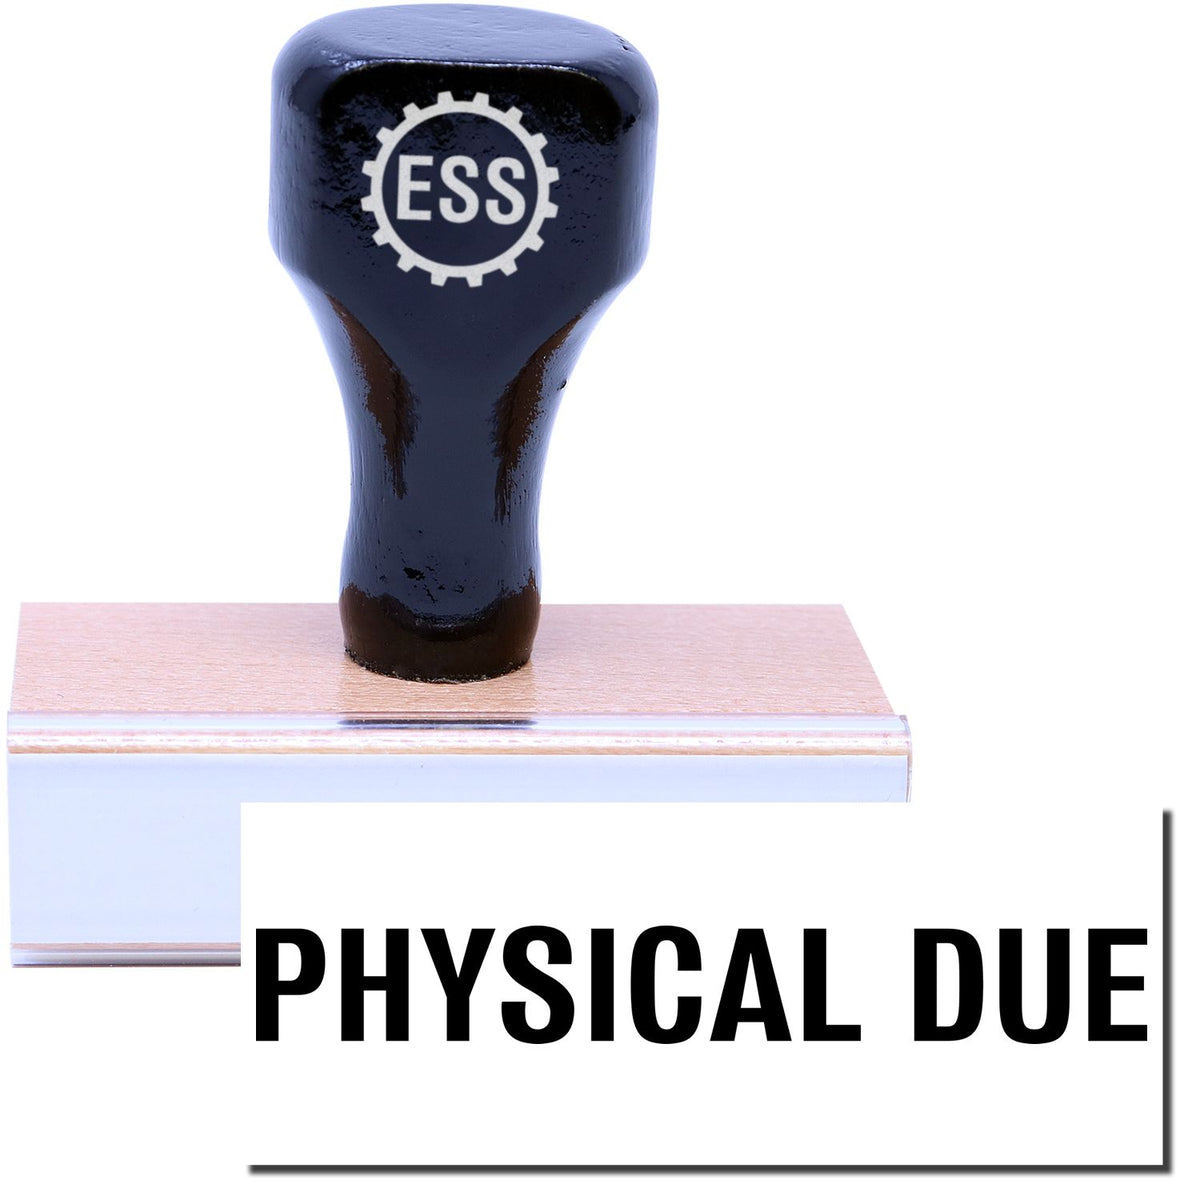 A stock office rubber stamp with a stamped image showing how the text &quot;PHYSICAL DUE&quot; in bold font is displayed after stamping.